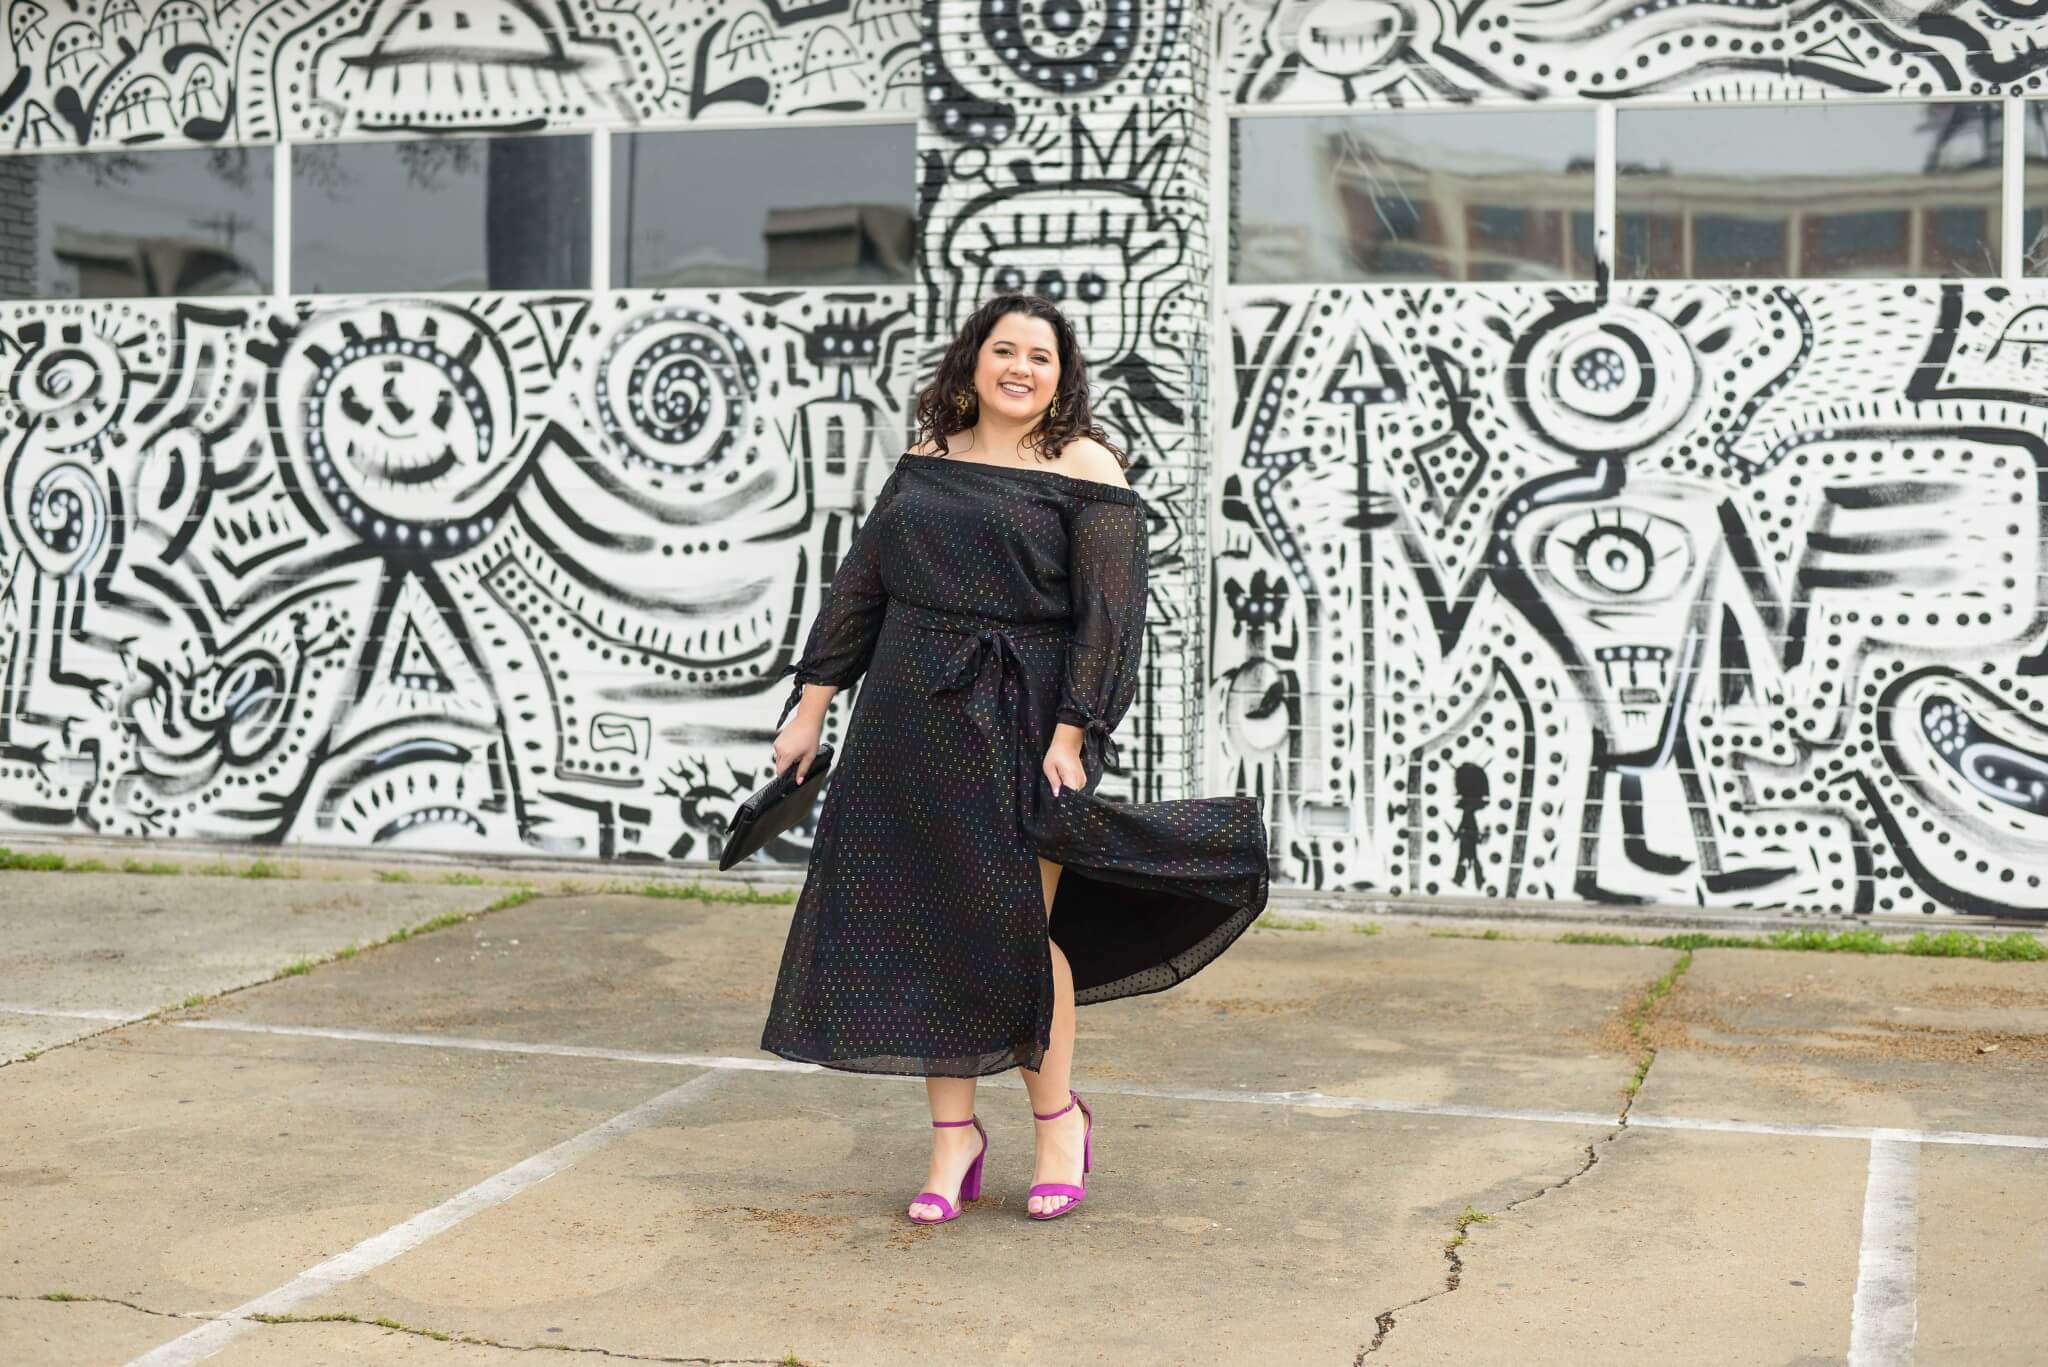 Feeling fancy in a colorful LBD from Eloquii #plussizestyle